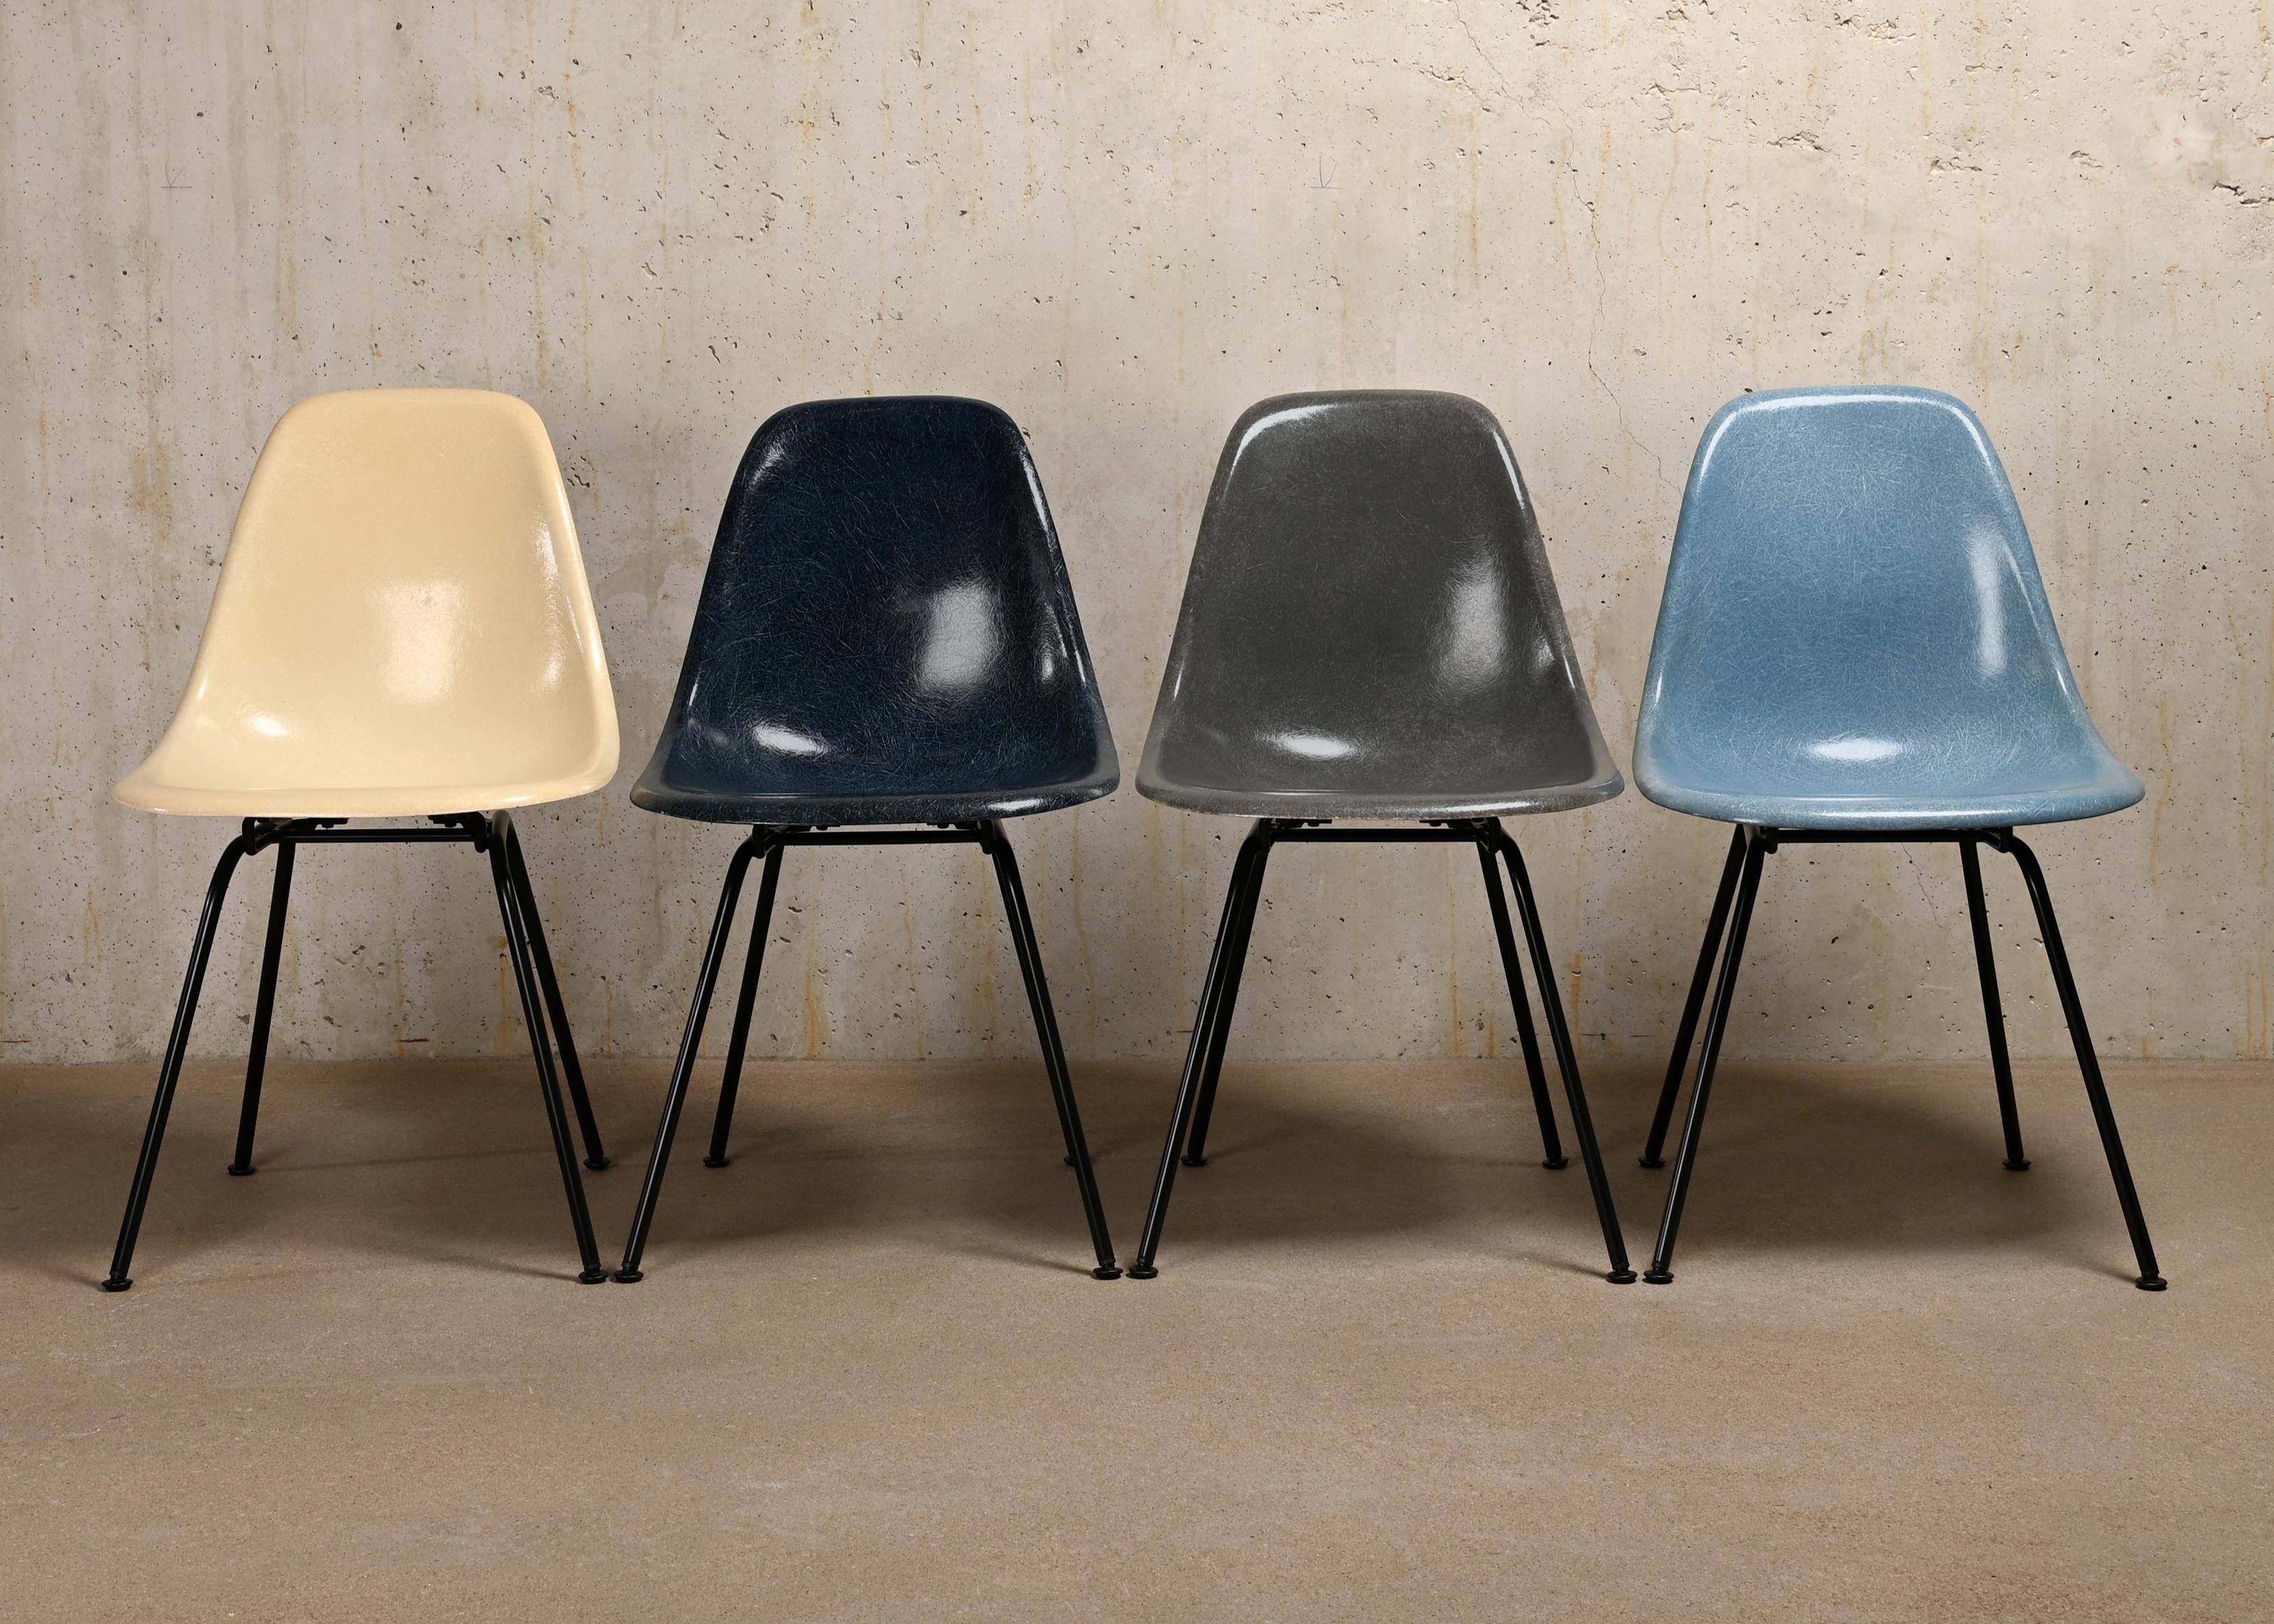 Iconic side chairs designed by Charles and Ray Eames for Herman Miller / Vitra. Molded fiberglass shells in the colours: Parchment, navy blue, elephant hide grey and ocean blue. Assembled on newly powder coated bases in basic dark. The chairs are in